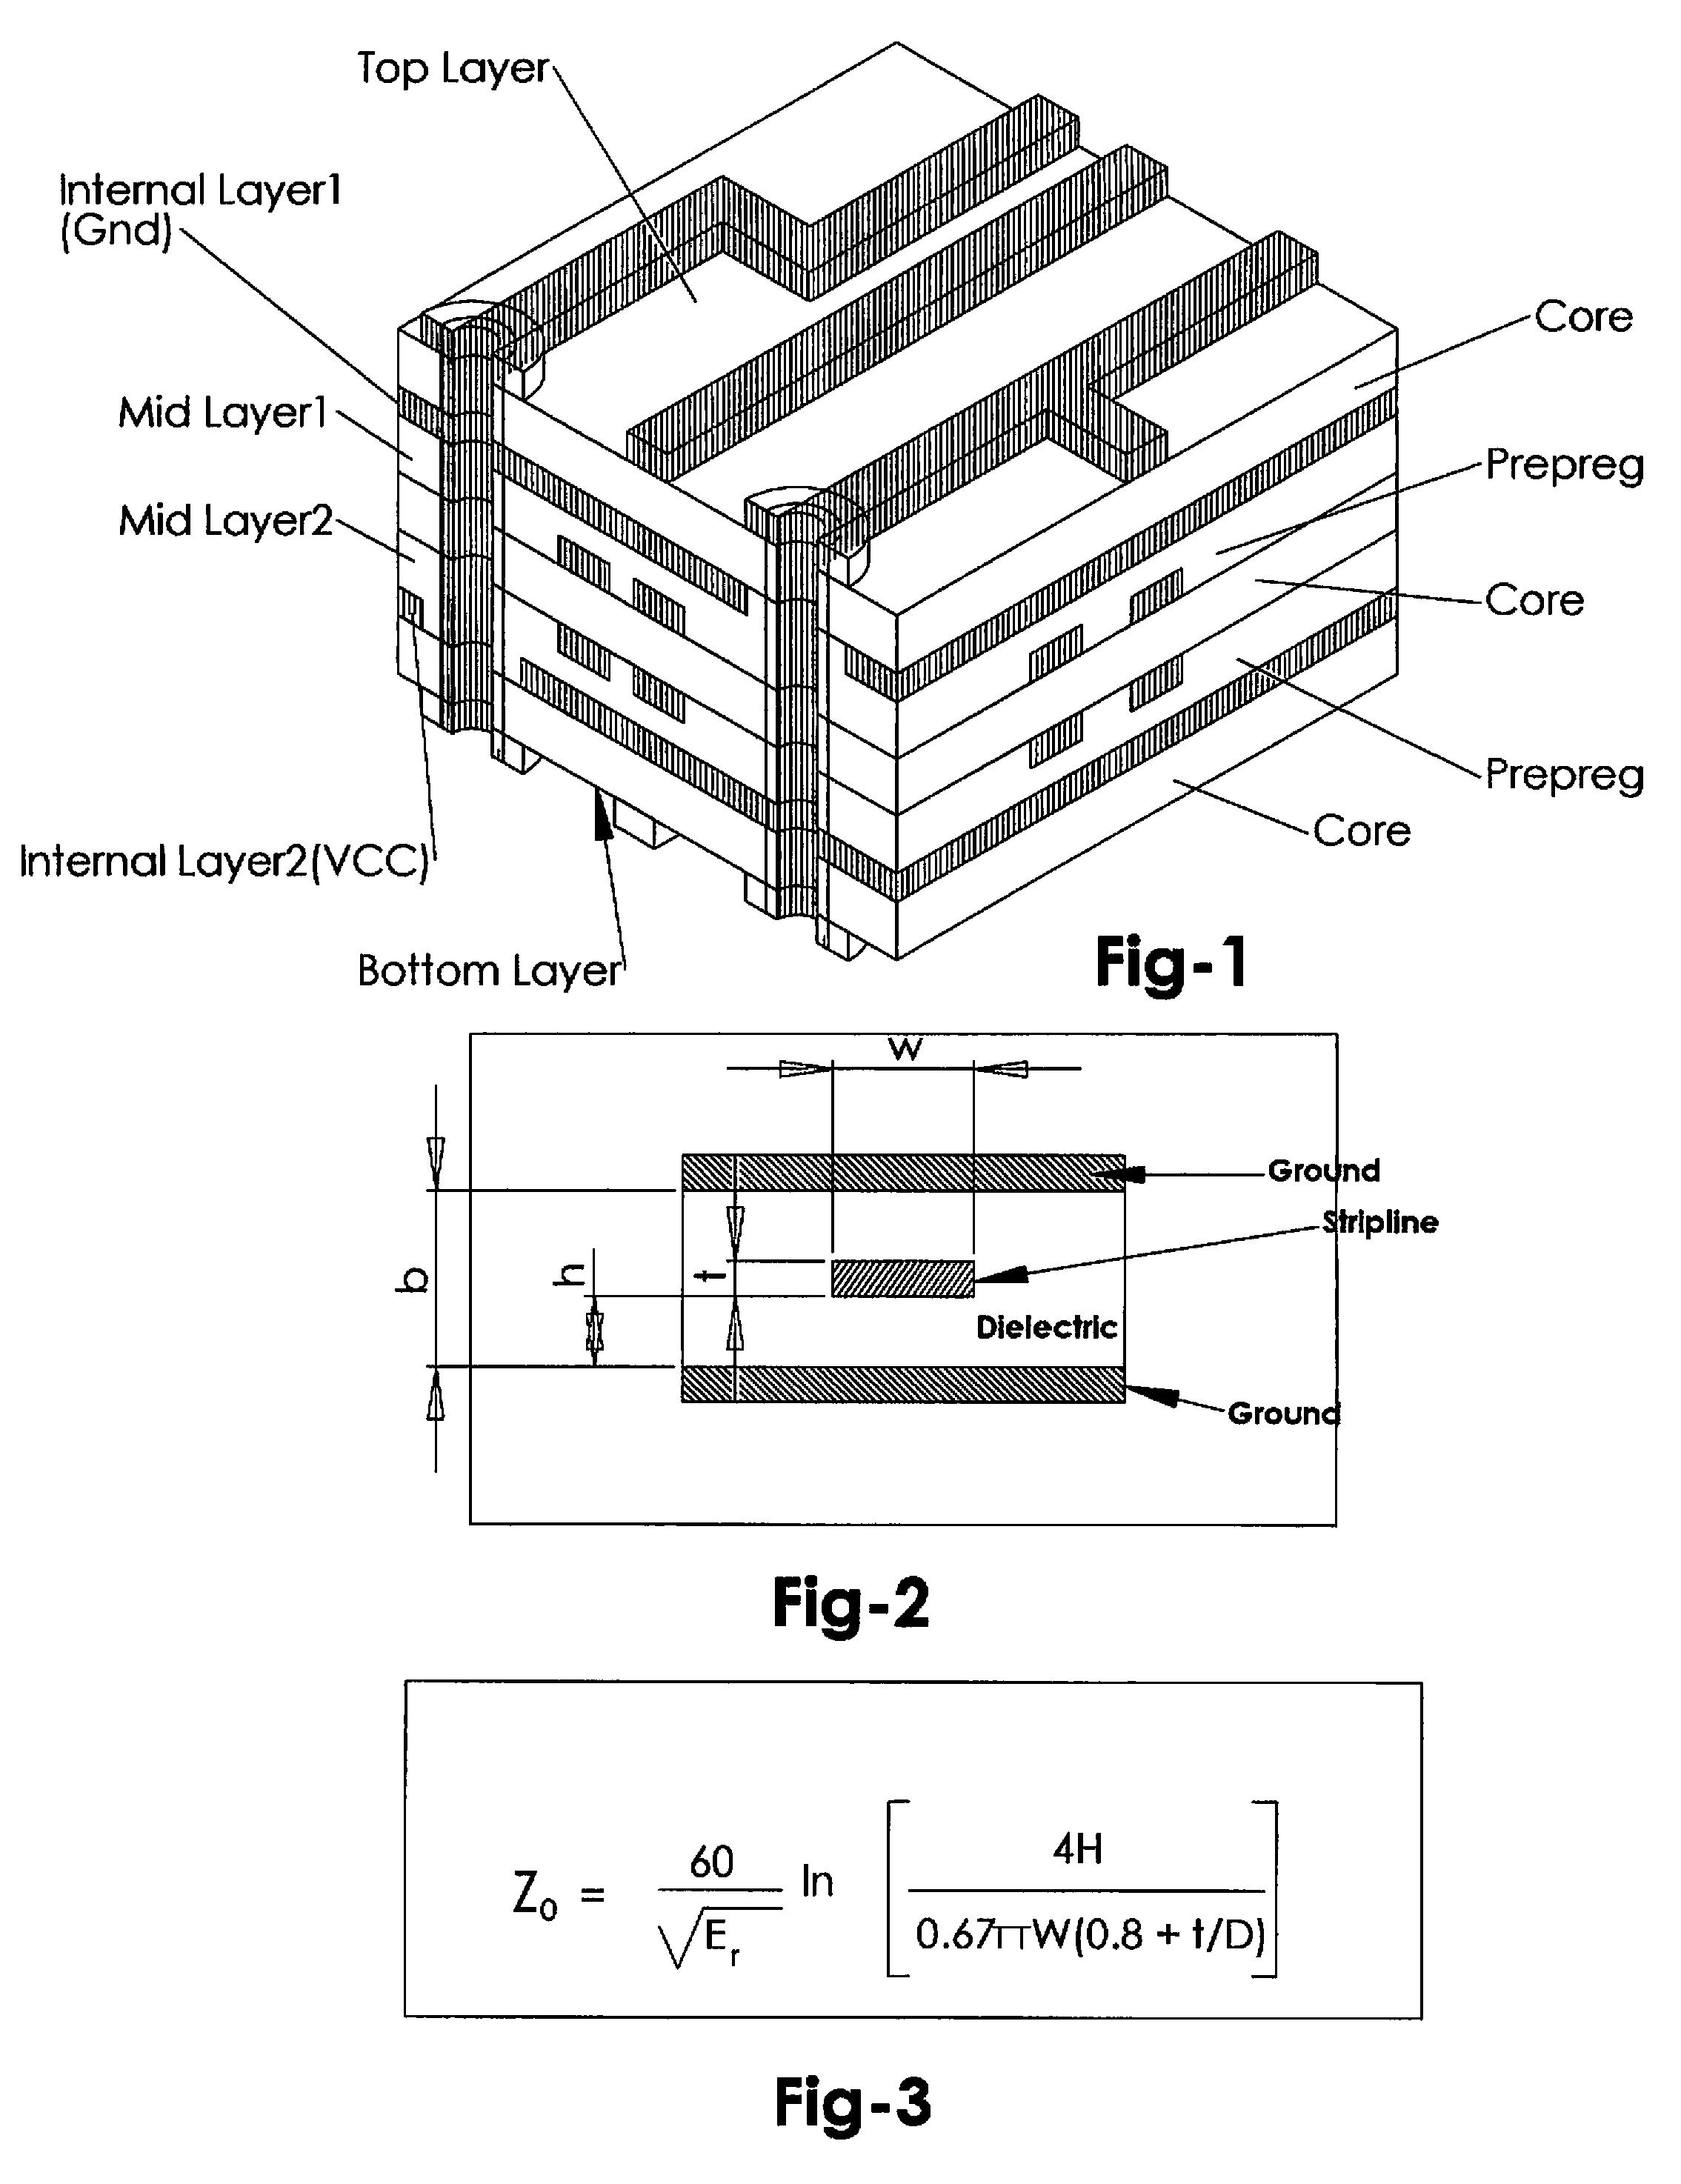 Process for Making a Multilayer Circuit Device Having Electrically Isolated Tightly Spaced Electrical Current Carrying Traces